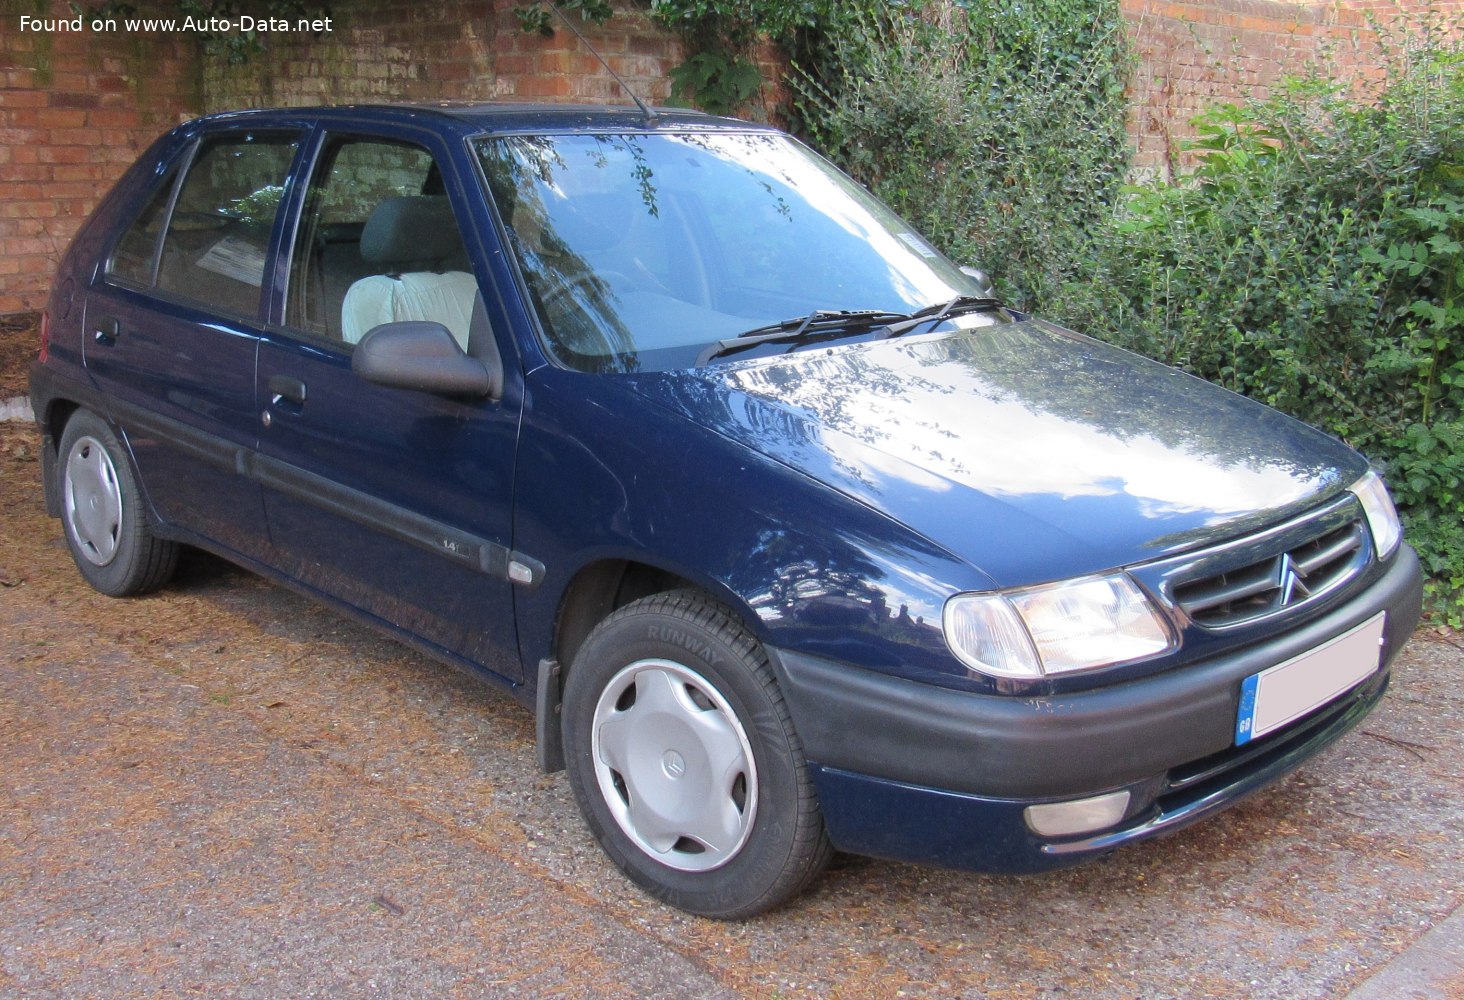 Used Citroën Saxo Hatchback (1996 - 2003) boot space & practicality